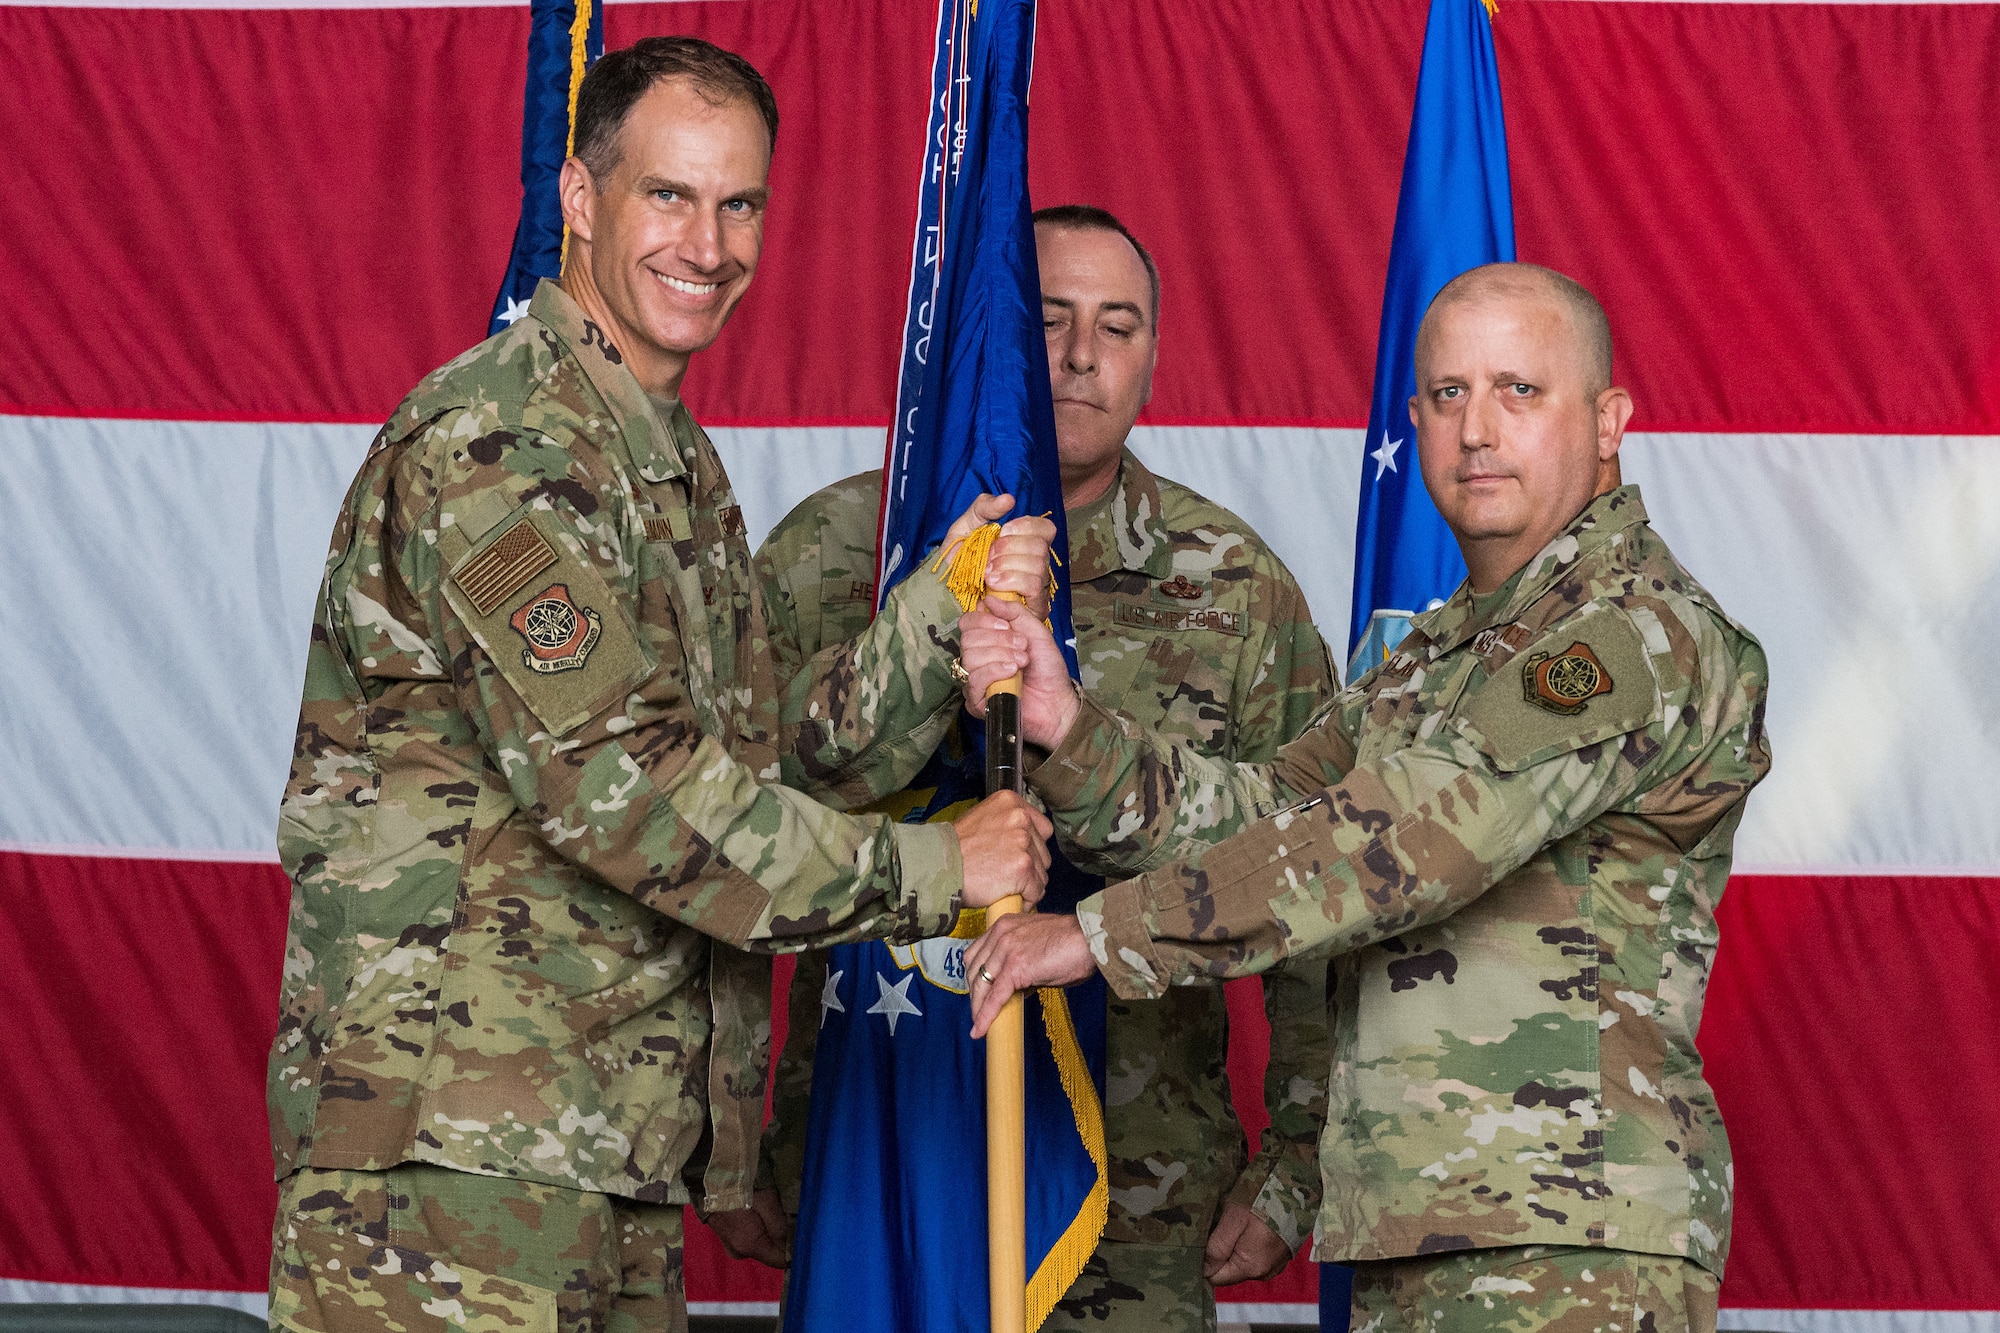 Col. Matt Husemann, left, 436th Airlift Wing commander, passes the 436th Maintenance Group guidon to Col. Bary Flack, new 436th MXG commander, during the 436th MXG Change of Command ceremony on Dover Air Force Base, Delaware, June 11, 2021. Flack took command from Col. Christopher May. The 436th MXG supports the worldwide global mobility mission by providing trained maintenance specialists for two of the Air Force's cargo transport aircraft, the C-5M Super Galaxy and the C-17A Globemaster III. (U.S. Air Force photo by Roland Balik)